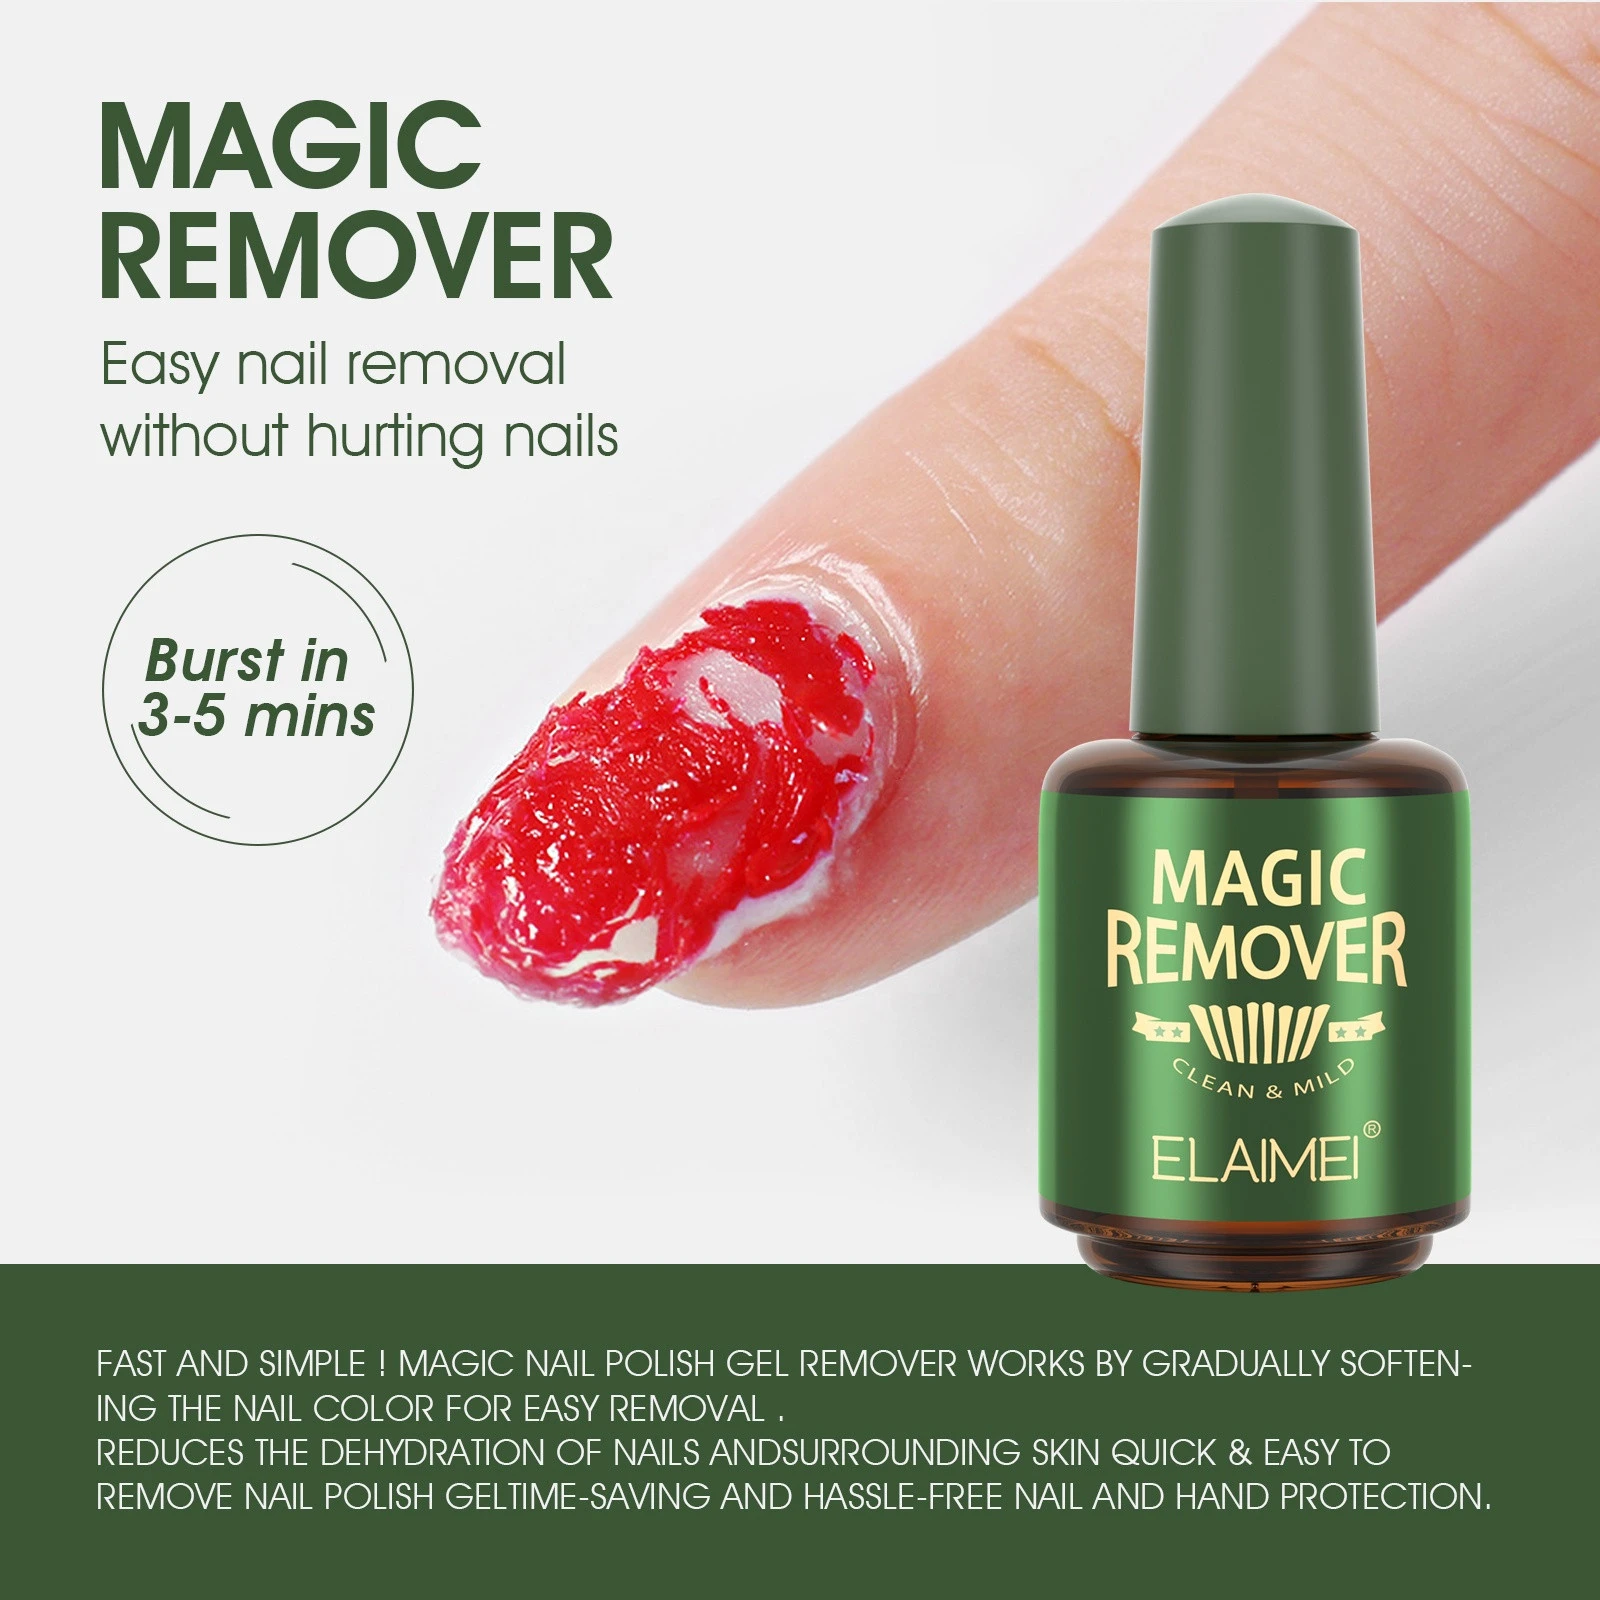 Super Popular Magic Nail Remover Cream Fast and Safe Gel Nail Polish Remover Soak off Cleaner